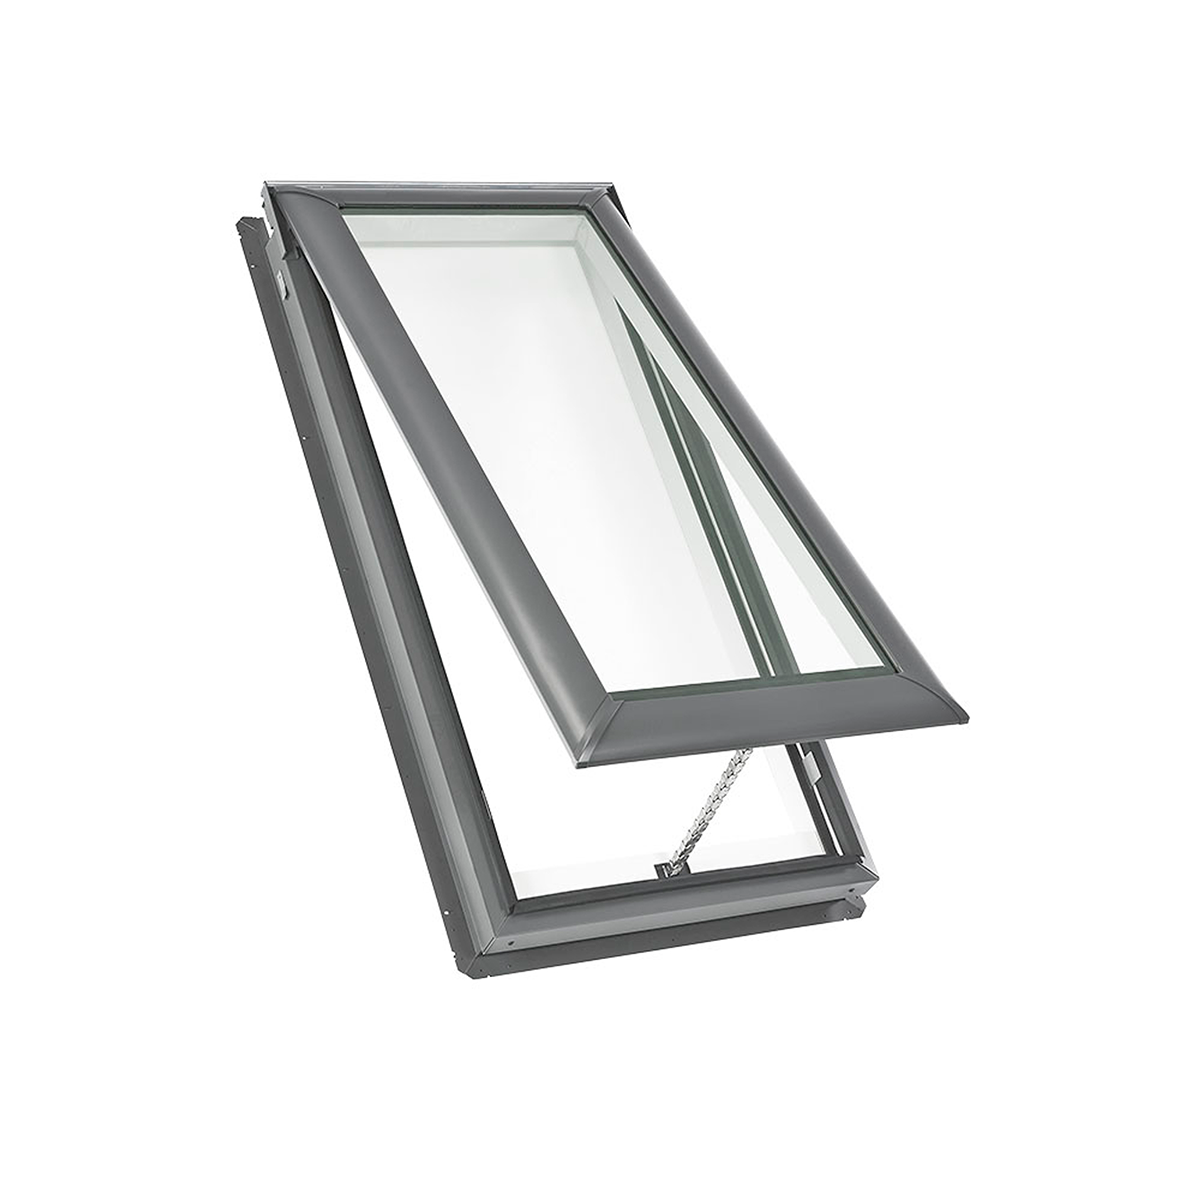 Manual Deck-Mount Skylight with Laminated Low-E3 Glass - 44-3/16 in. x 45-3/4 in. - VS S06